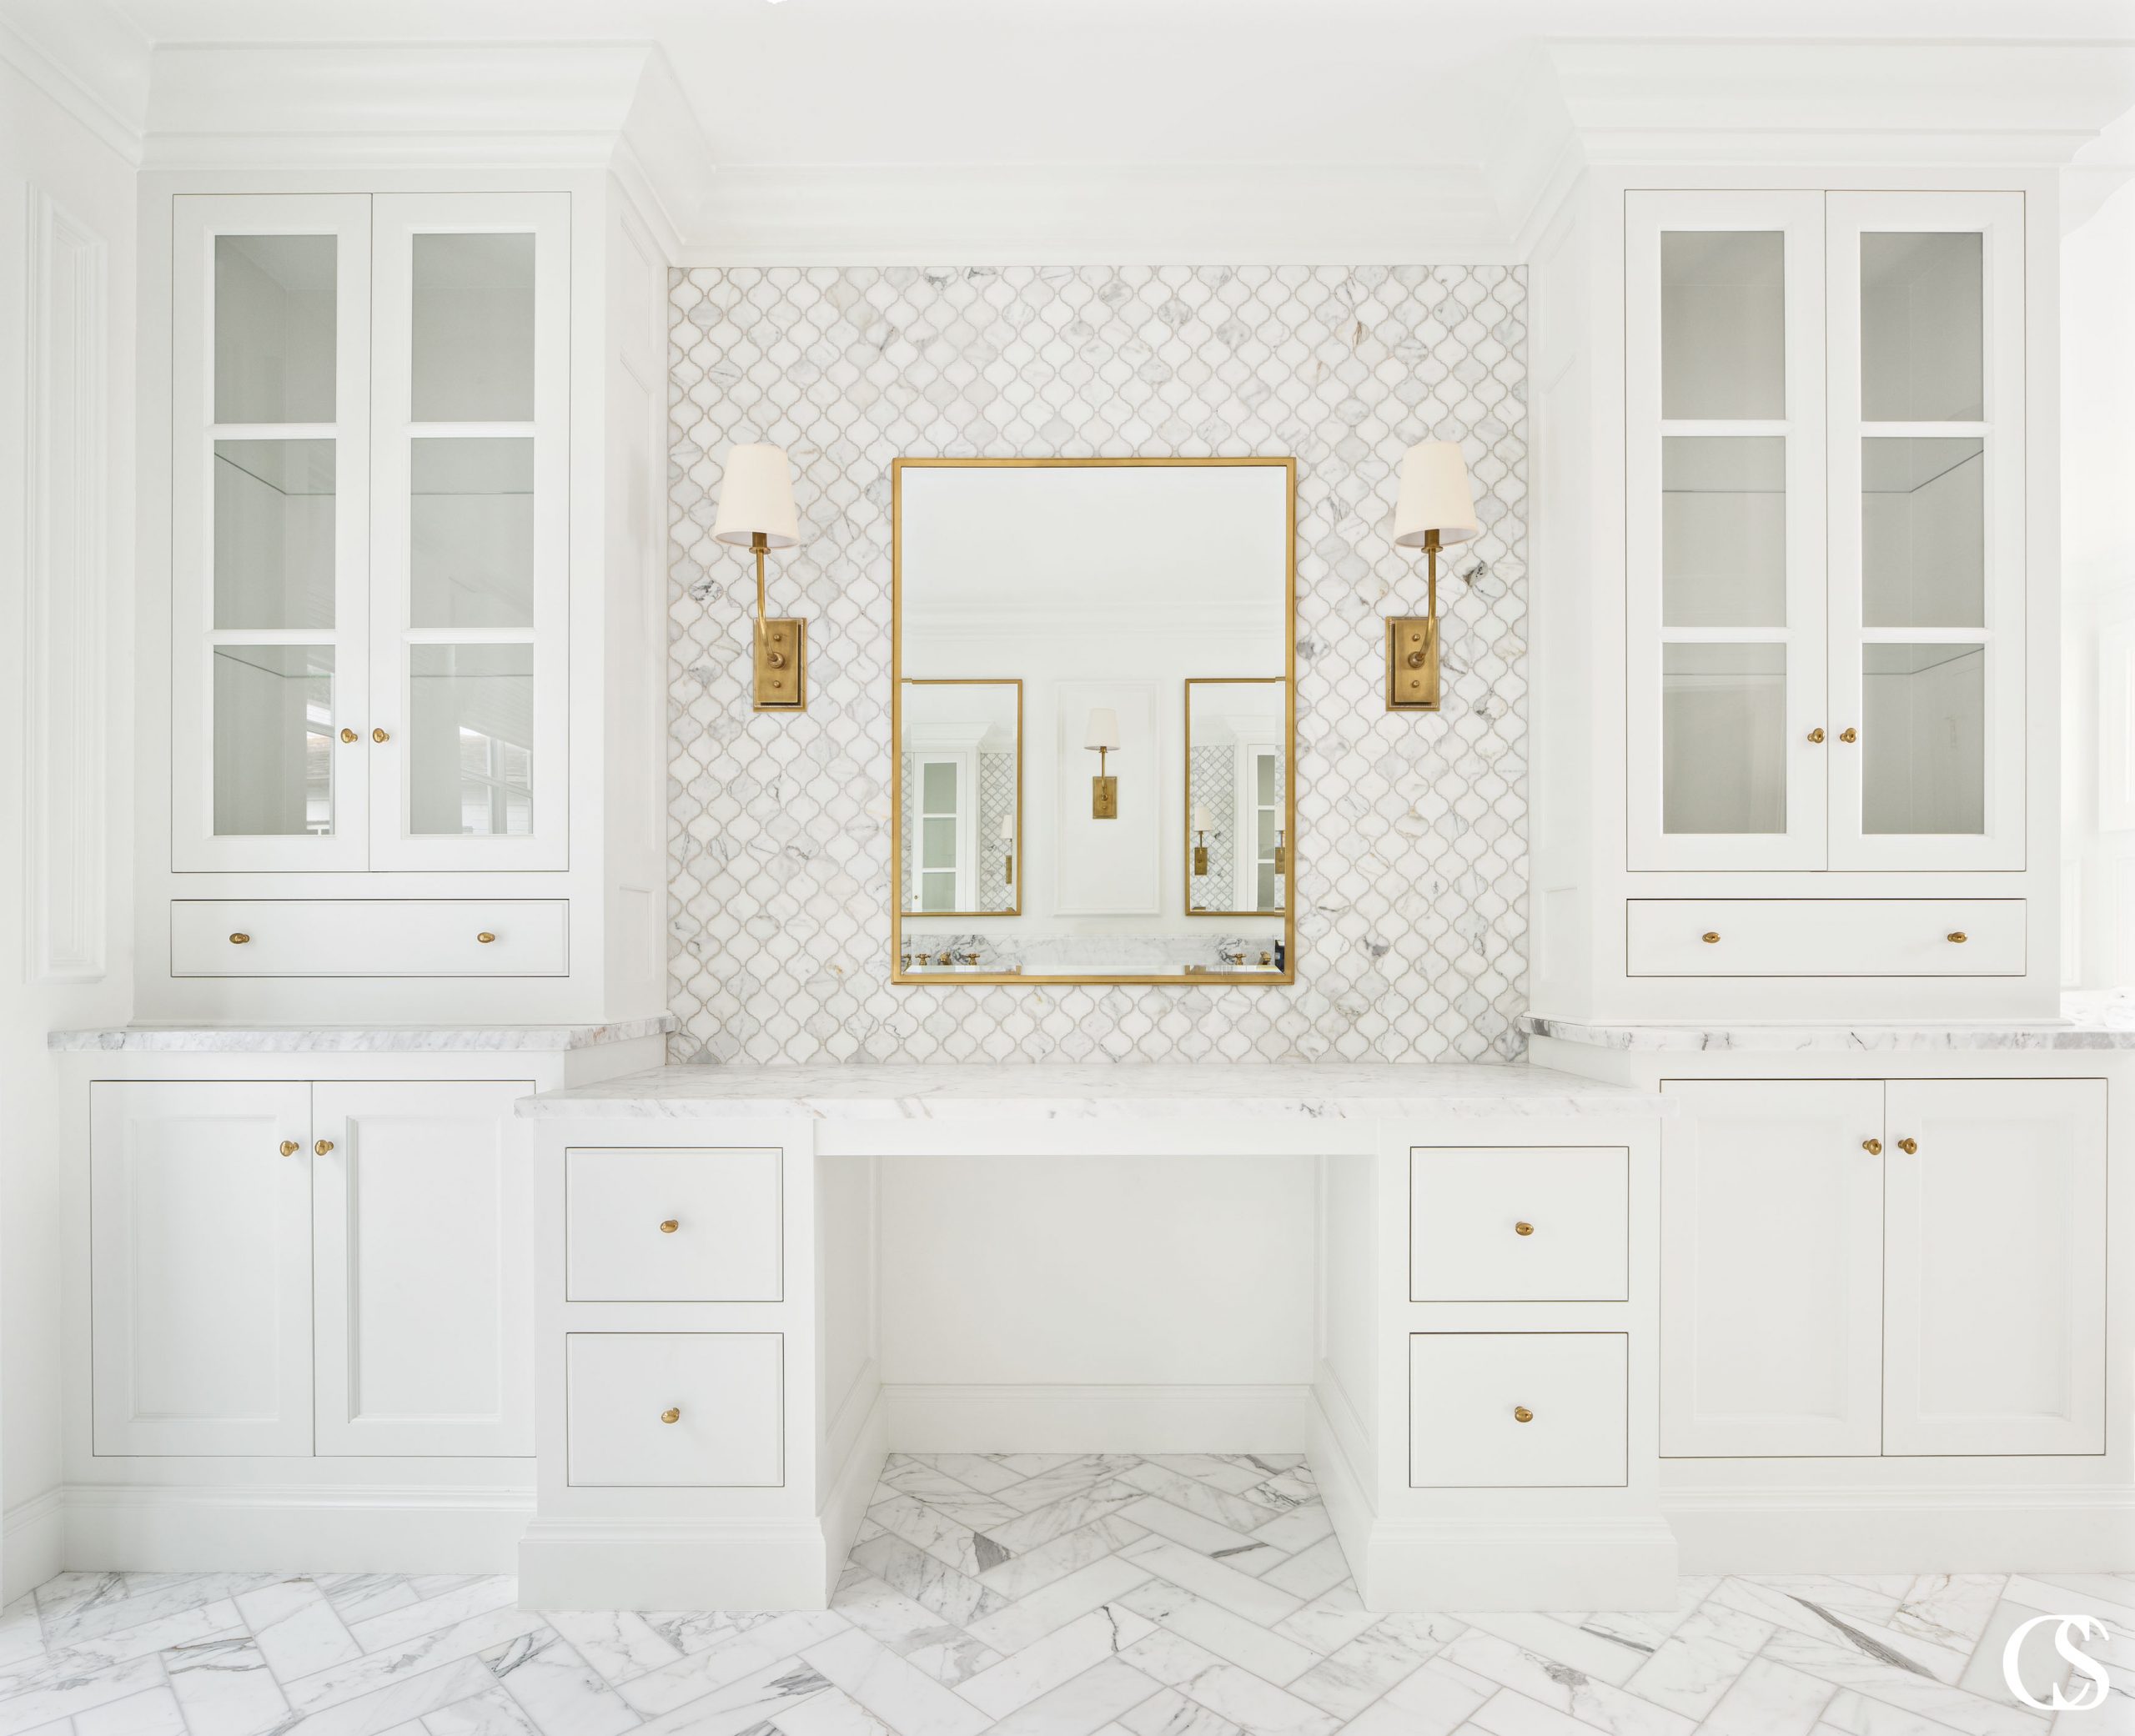 Opting for custom unique bathroom cabinet design means getting your own personal vanity and plenty of gorgeous storage opposite your double sinks. That's what I'd call heaven.